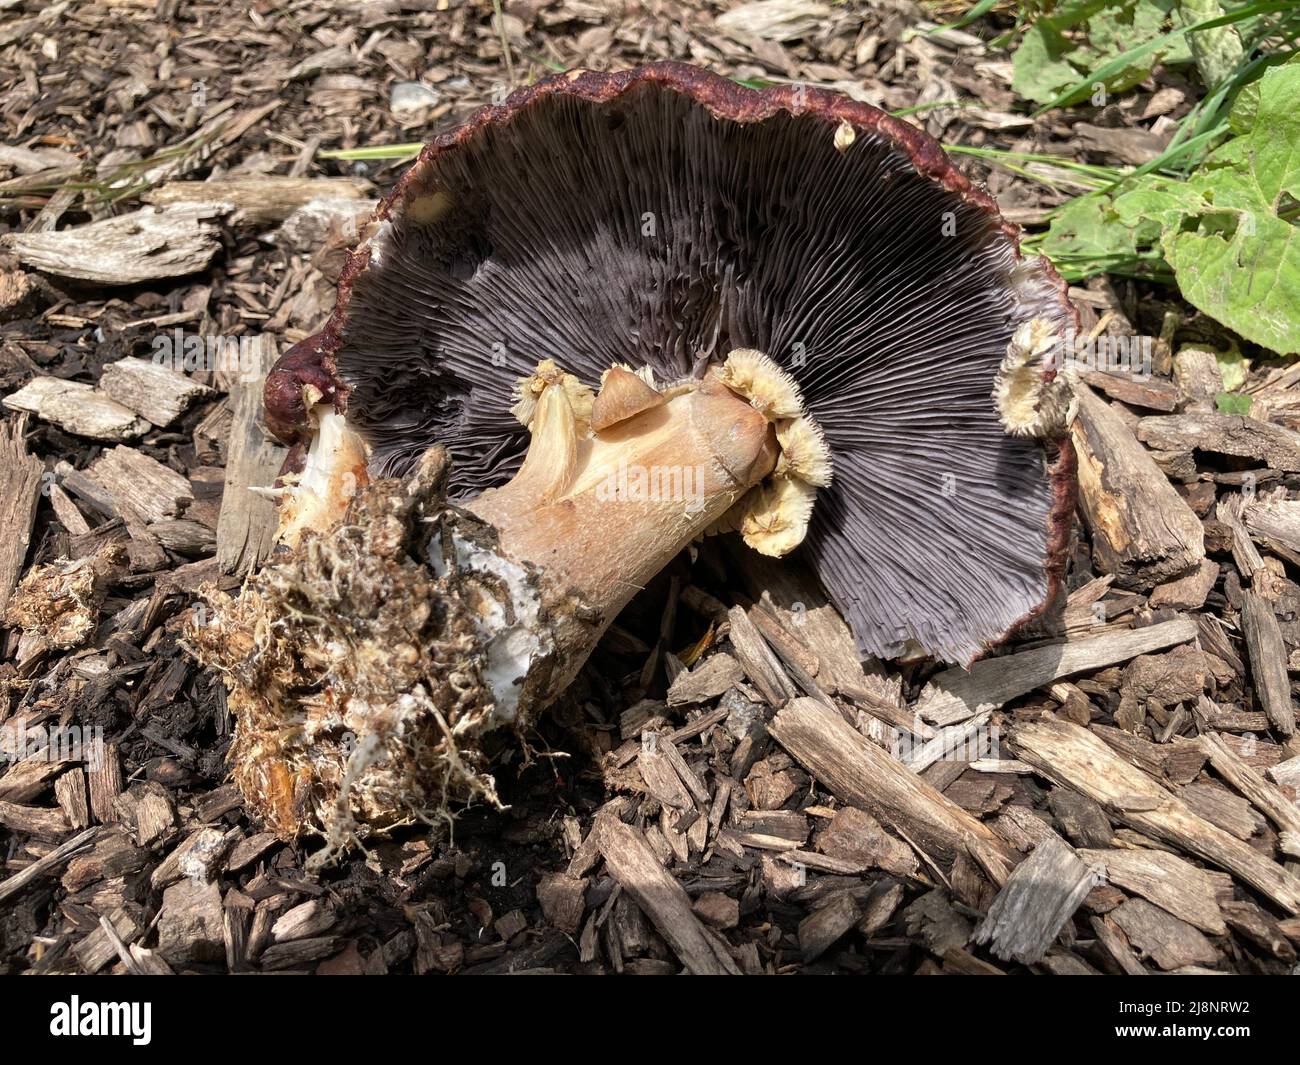 burgundy mushroom lying on wood chips with the mycelium and gills visible Stock Photo